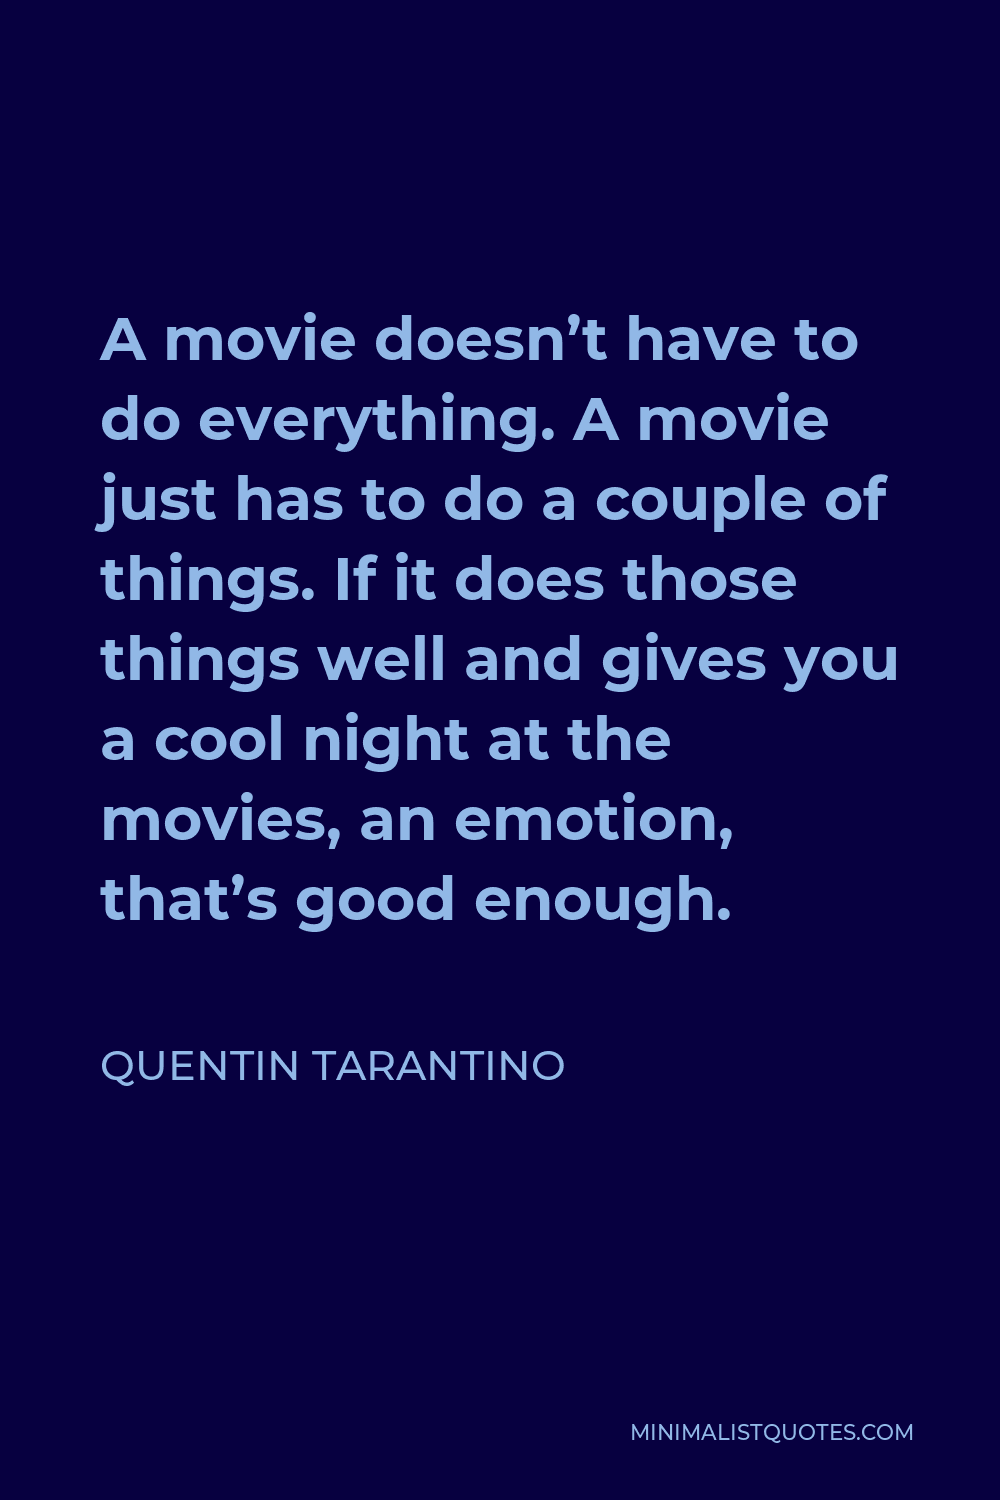 Quentin Tarantino Quote - A movie doesn’t have to do everything. A movie just has to do a couple of things. If it does those things well and gives you a cool night at the movies, an emotion, that’s good enough.